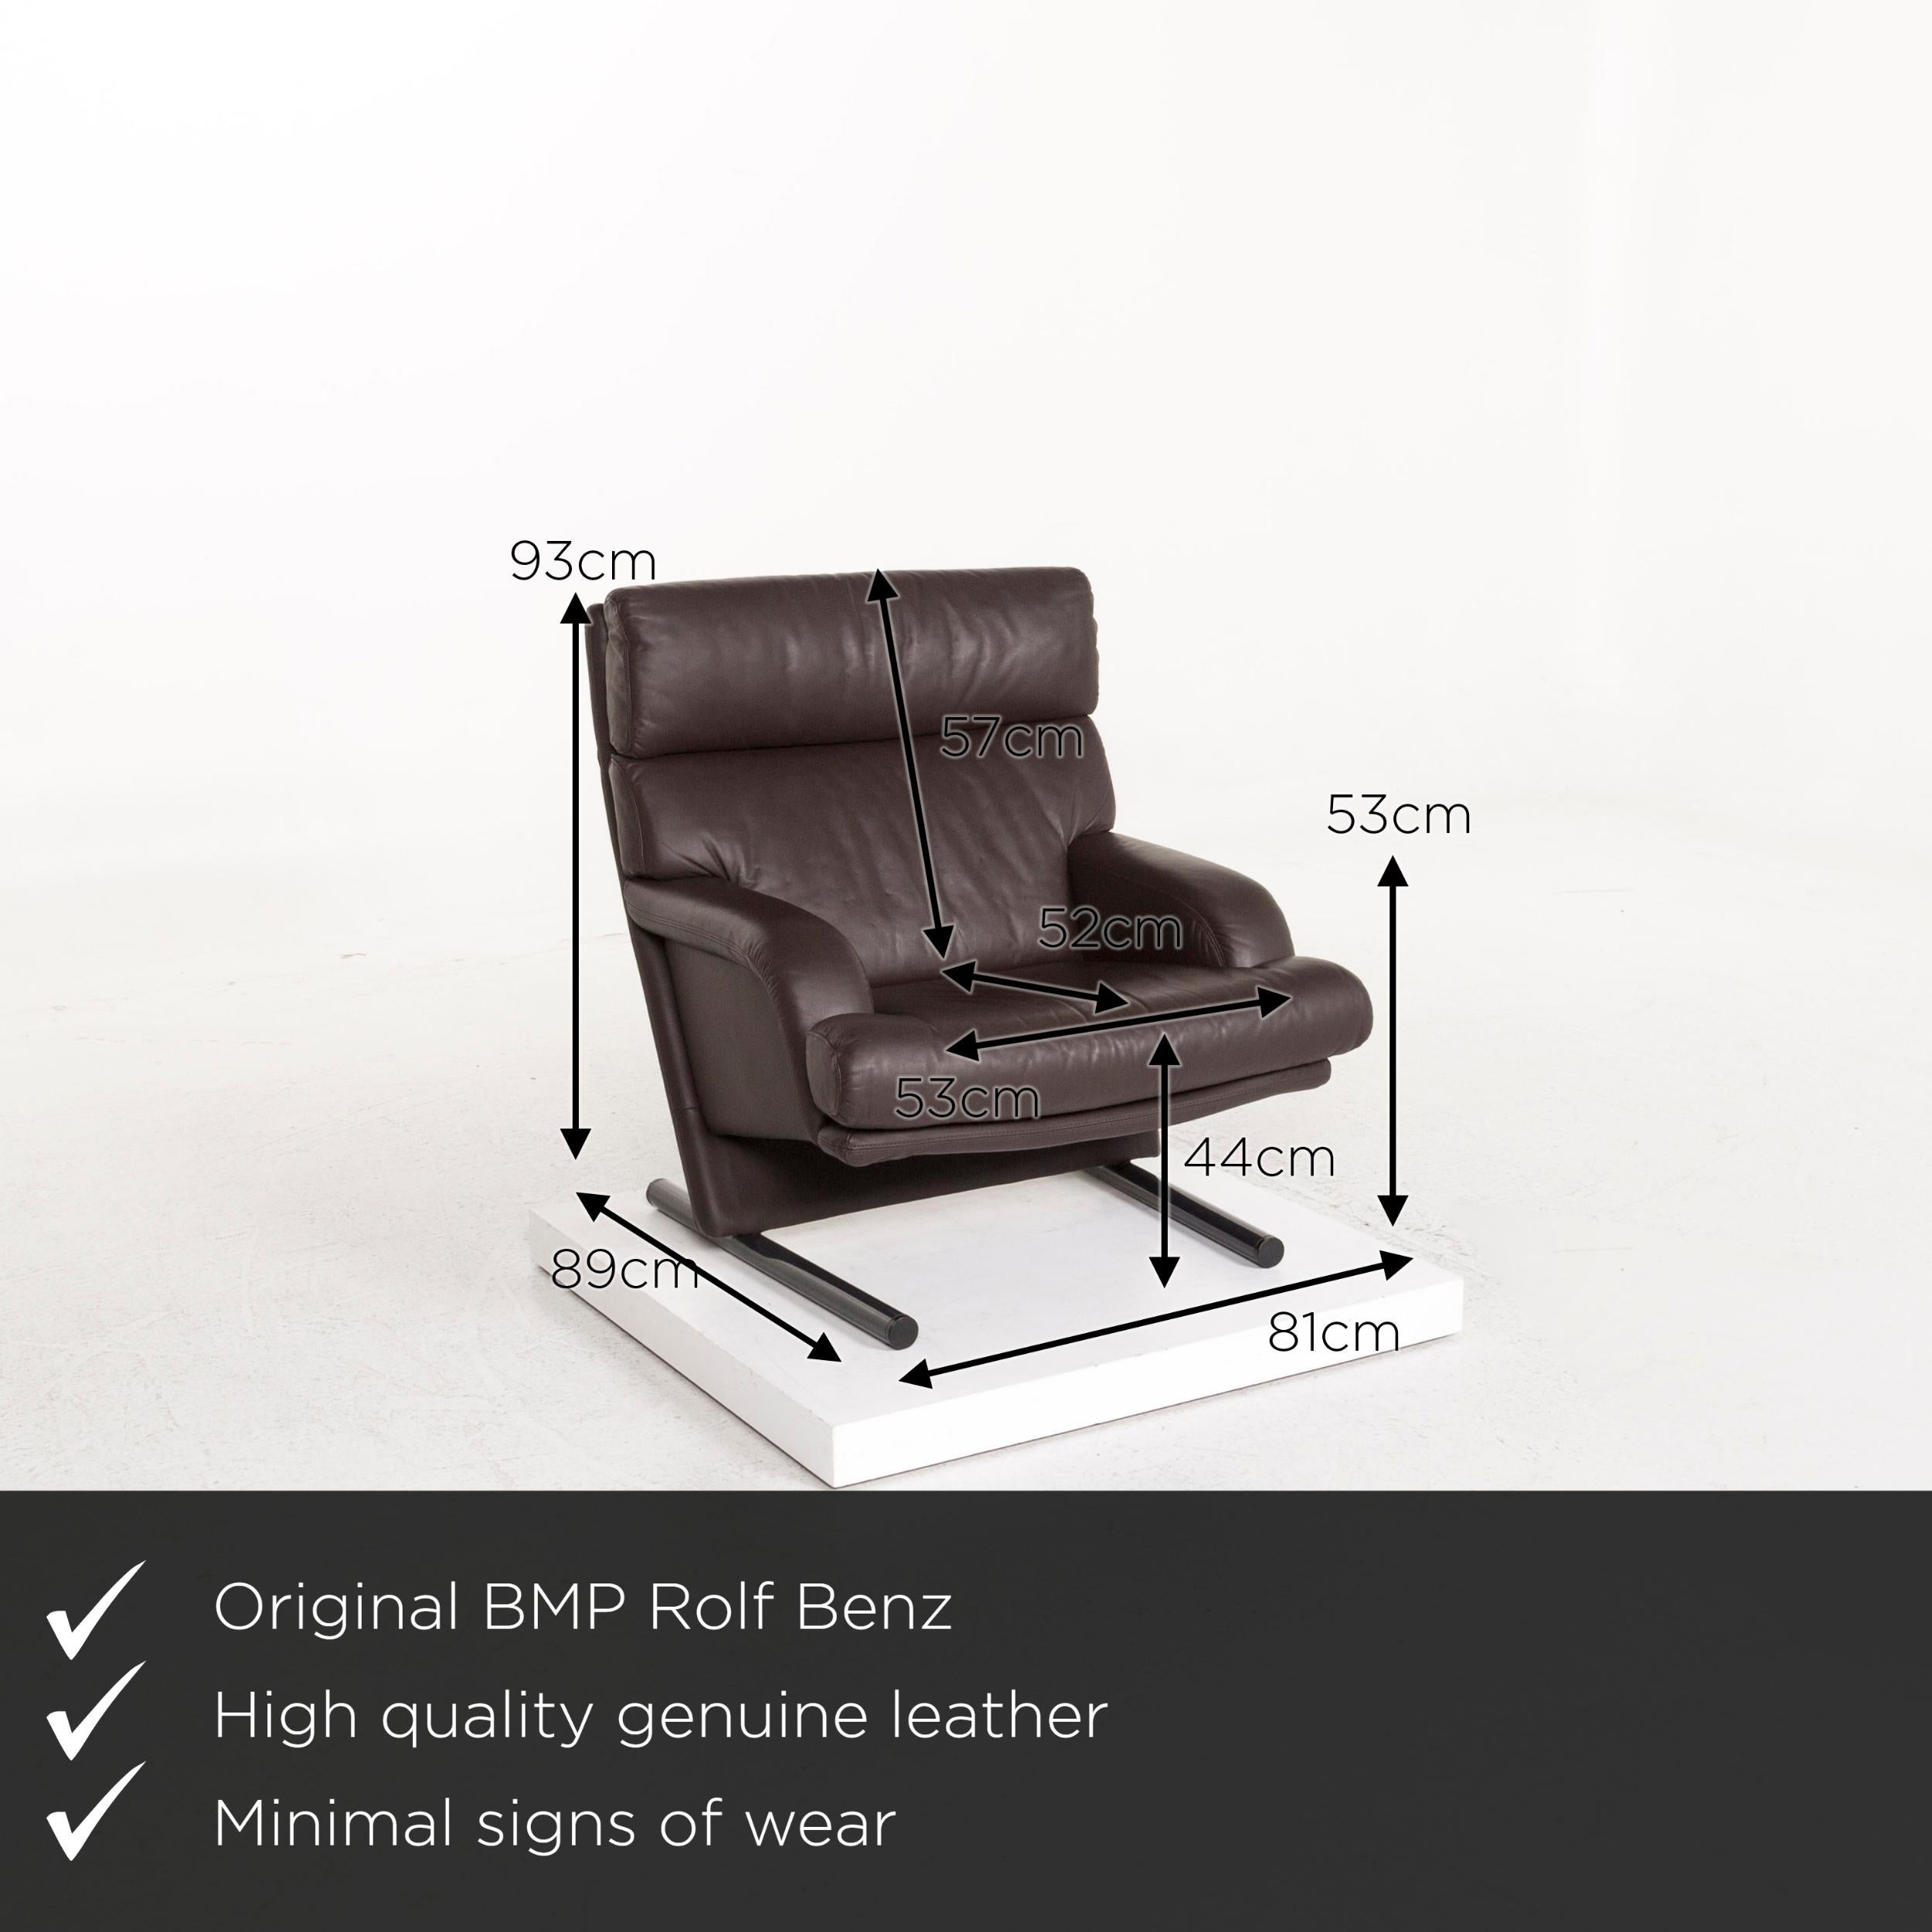 We bring to you a Rolf Benz leather armchair brown dark brown club armchair.


 Product measurements in centimeters:
 

Depth 89
Width 81
Height 93
Seat-height 44
Rest-height 53
Seat-depth 52
Seat-width 53
Back-height 57.
 